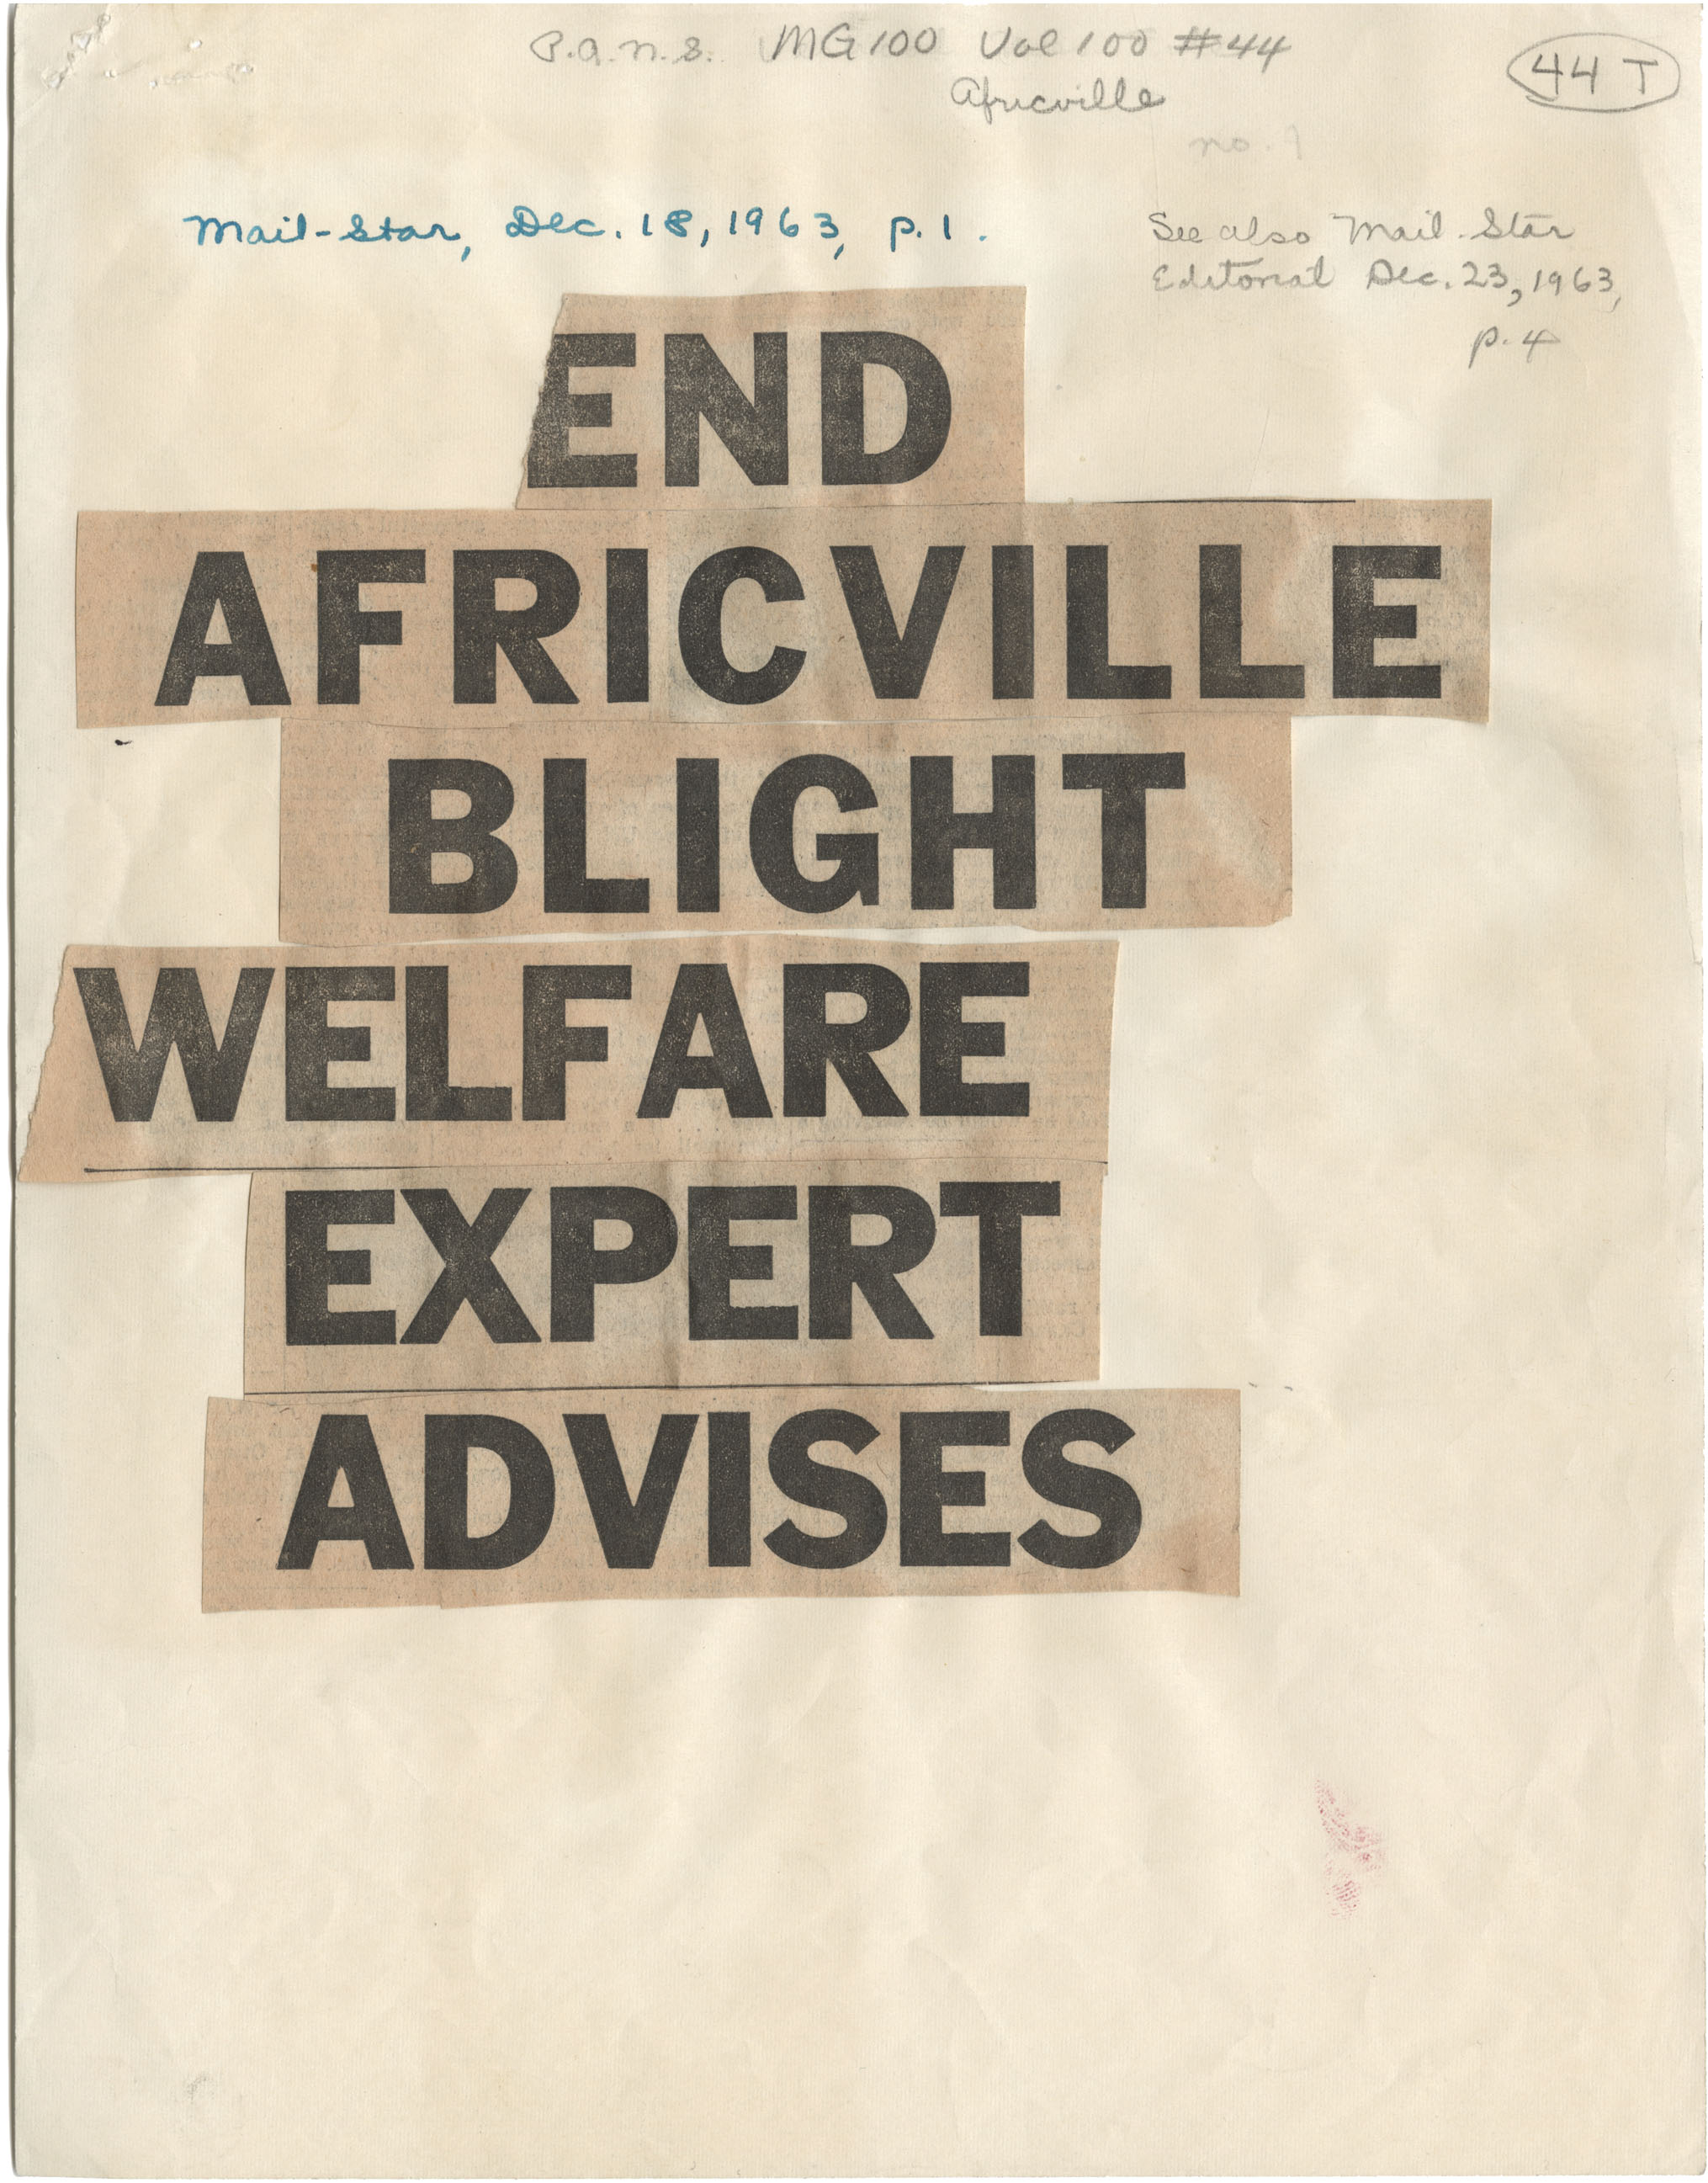 african-heritage : End Africville Blight Welfare Expert Advises: Calls for Early Start to Shift Negro Residents, Mail Star excerpt